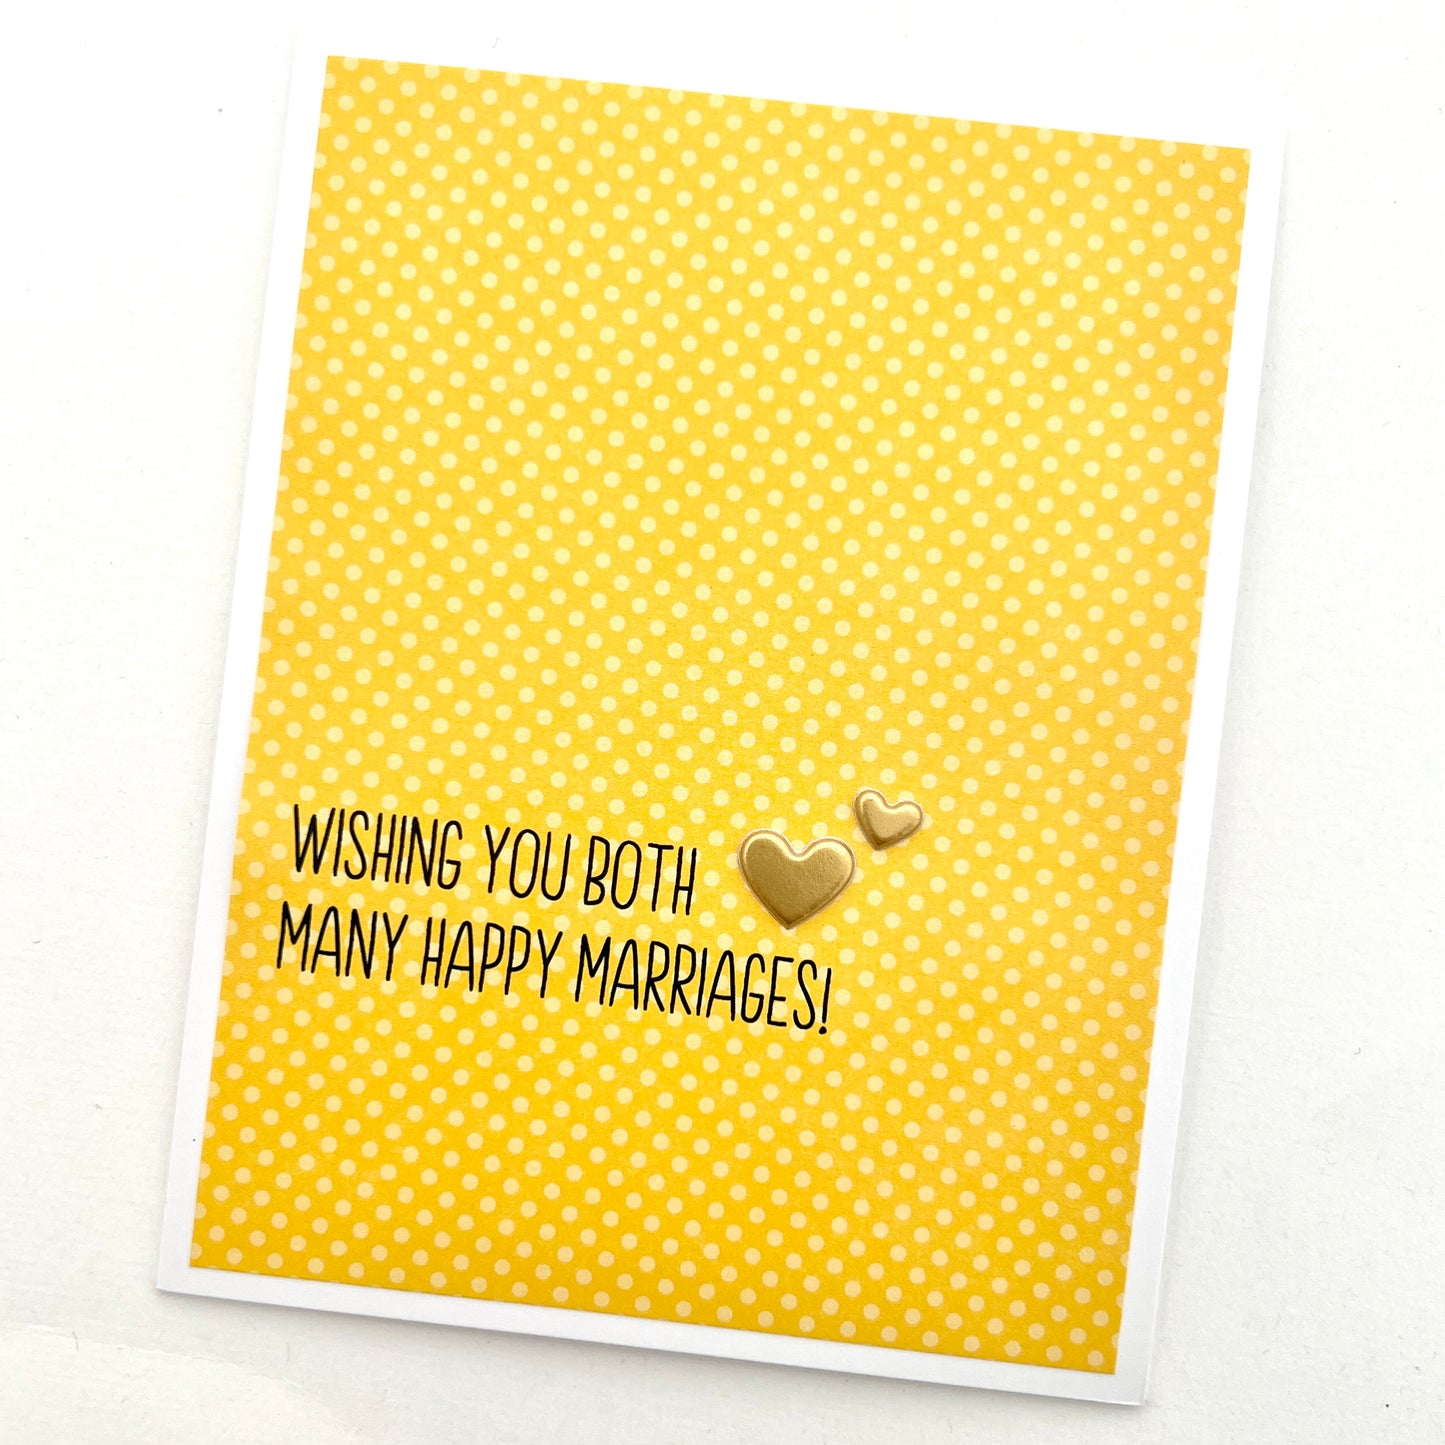 Many Happy Marriages card